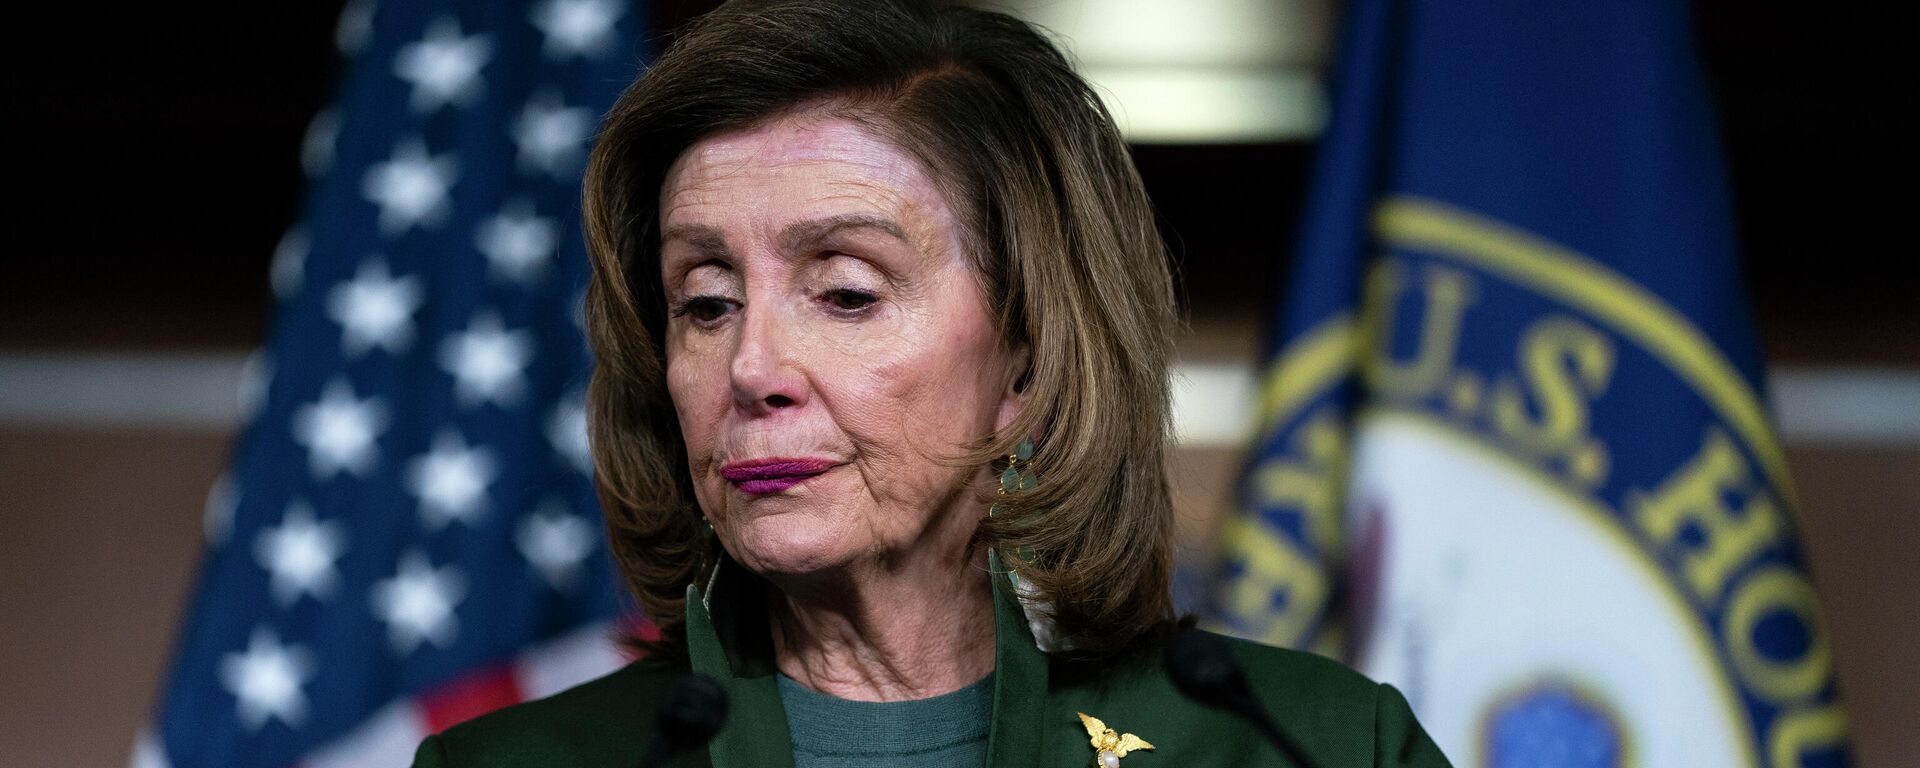 Speaker of the House Nancy Pelosi of Calif., pauses as she speaks during a news conference on Capitol Hill, Thursday, Feb. 3, 2022, in Washington - Sputnik International, 1920, 06.05.2022